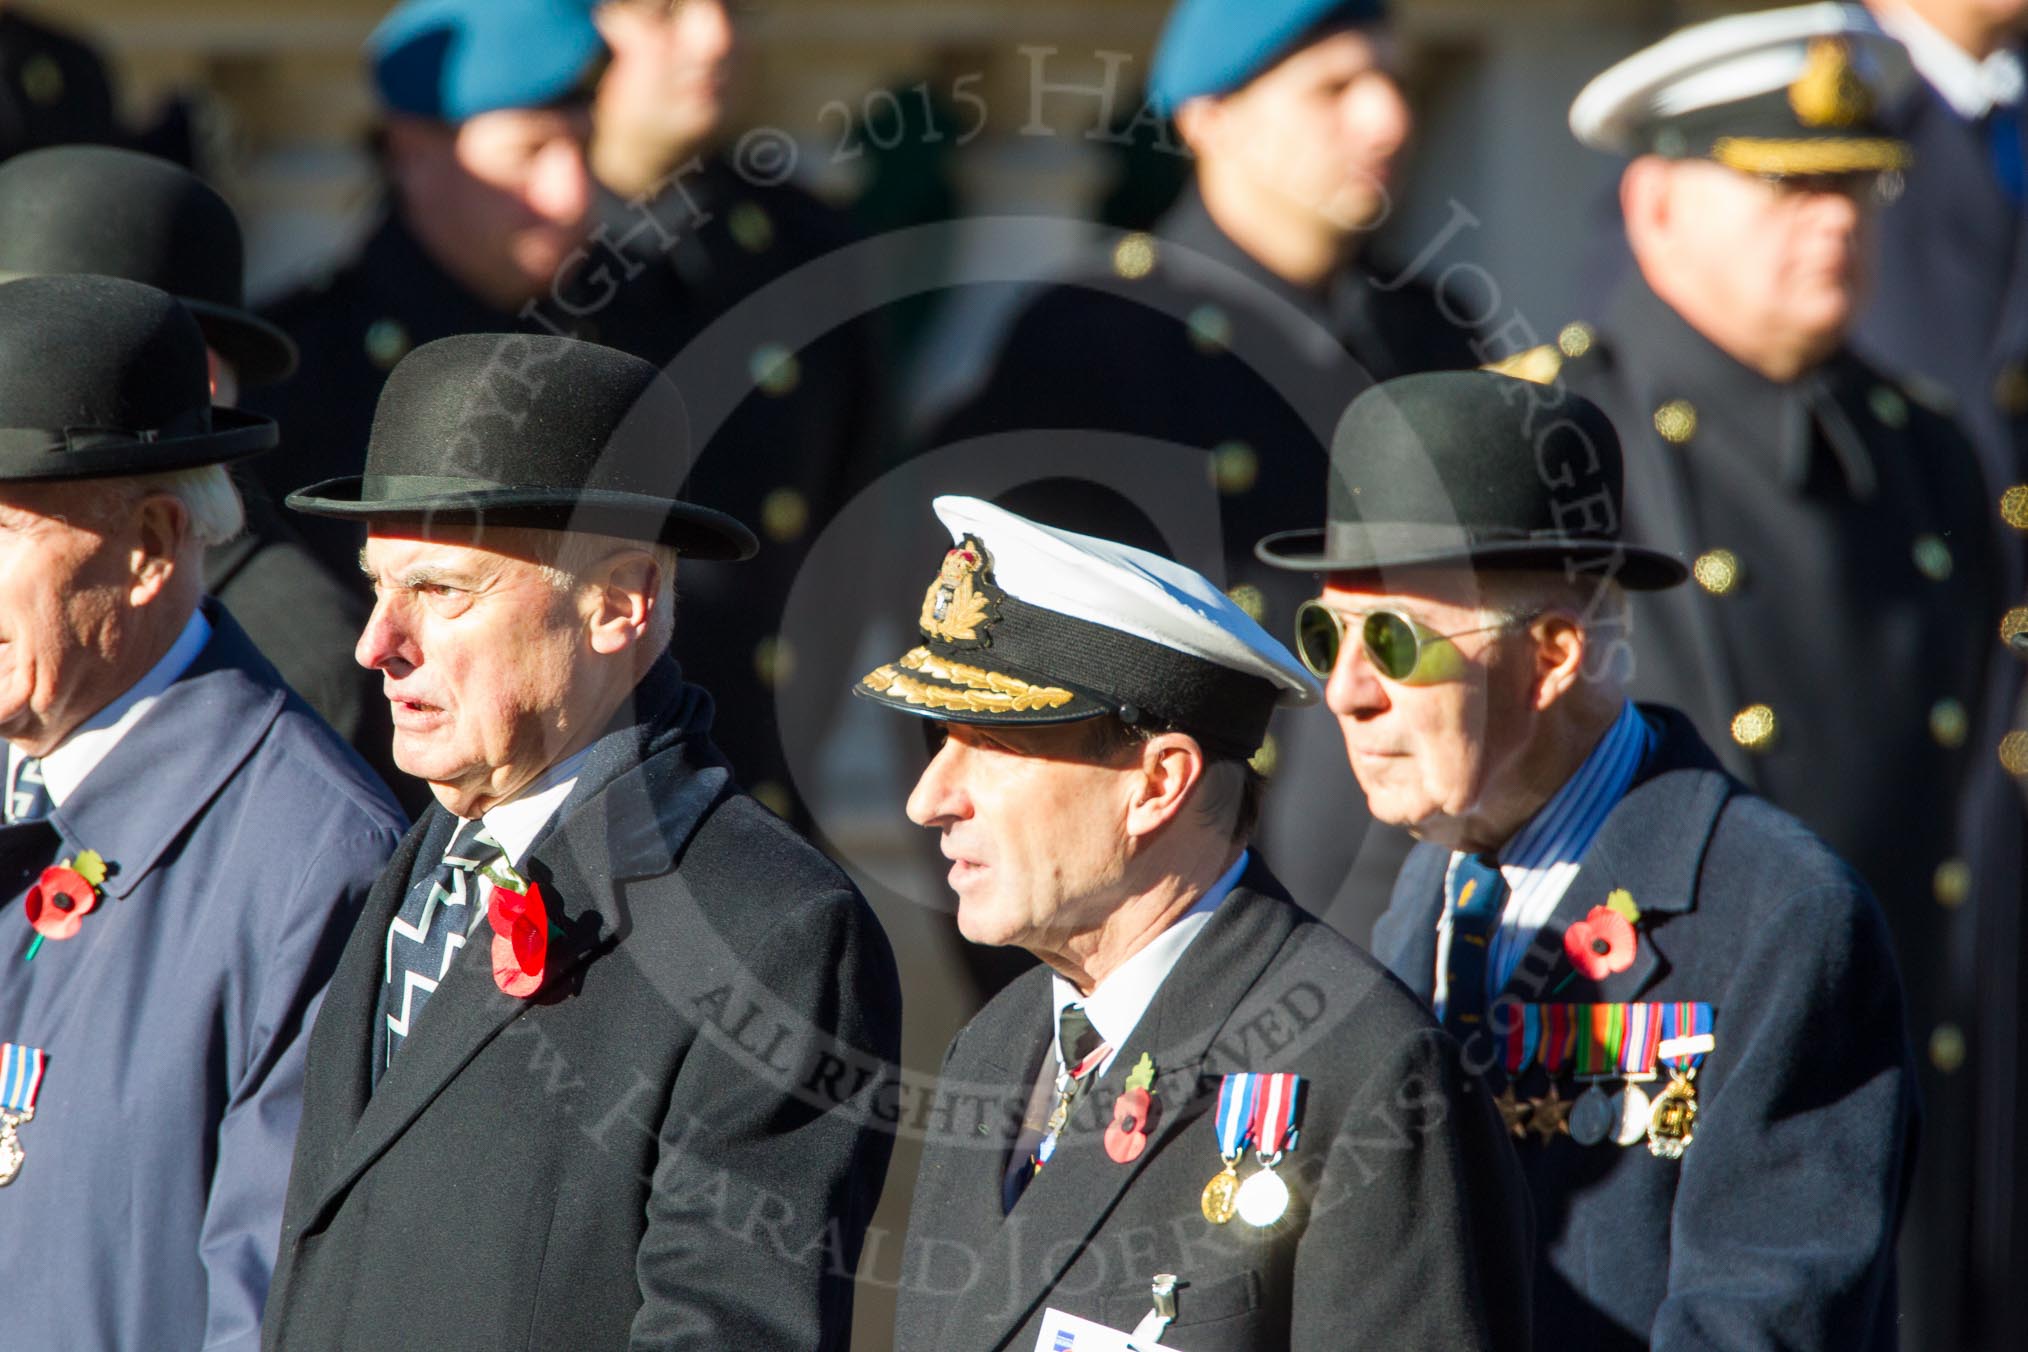 Remembrance Sunday Cenotaph March Past 2013: E13 - Fleet Air Arm Officers Association..
Press stand opposite the Foreign Office building, Whitehall, London SW1,
London,
Greater London,
United Kingdom,
on 10 November 2013 at 11:46, image #474